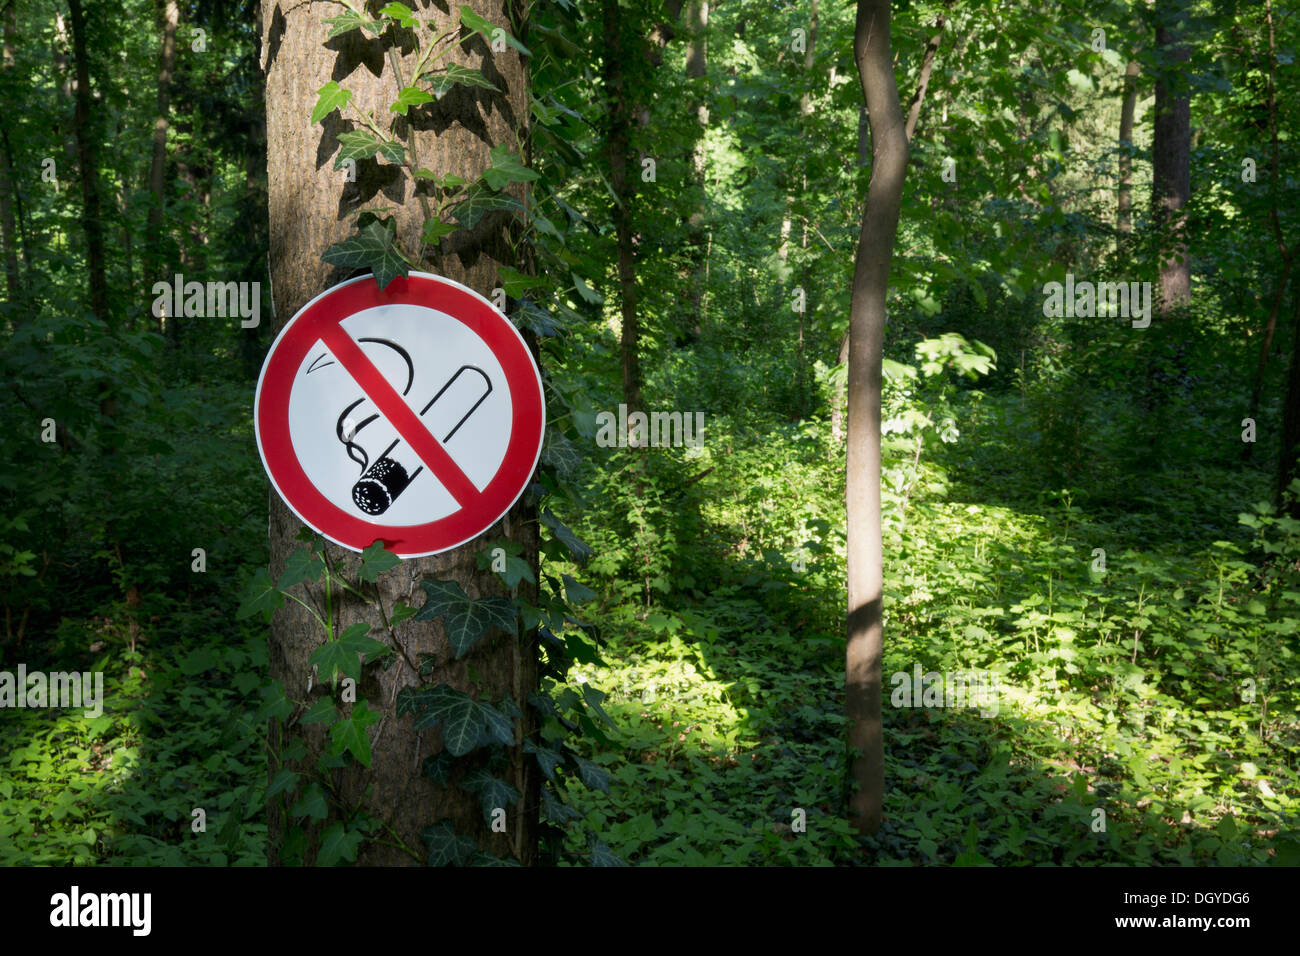 A no smoking sign posted on a tree trunk in a wooded area Stock Photo